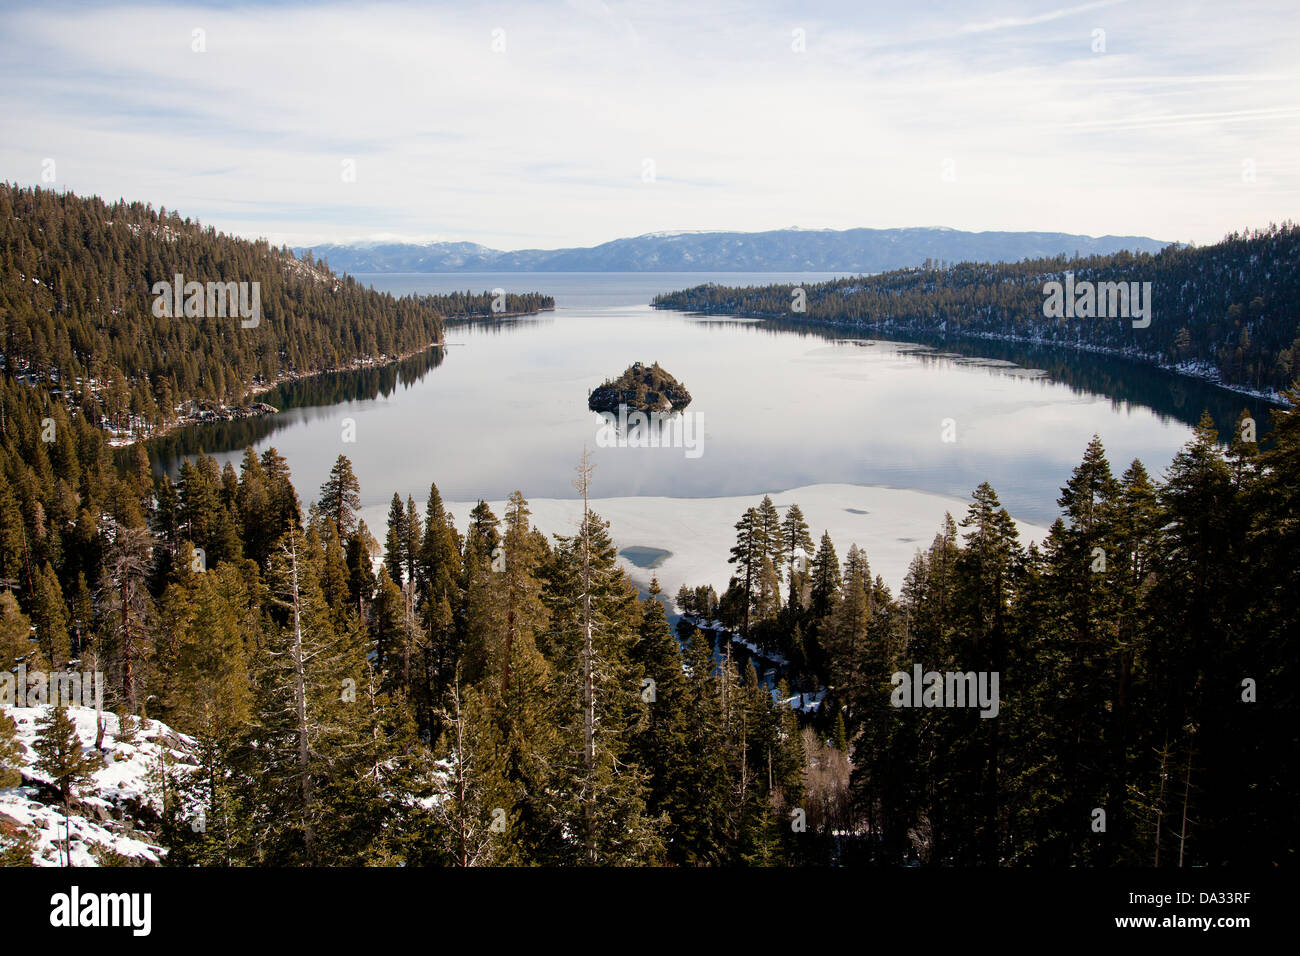 A view over fannette island in lake Tahoe California USA Stock Photo